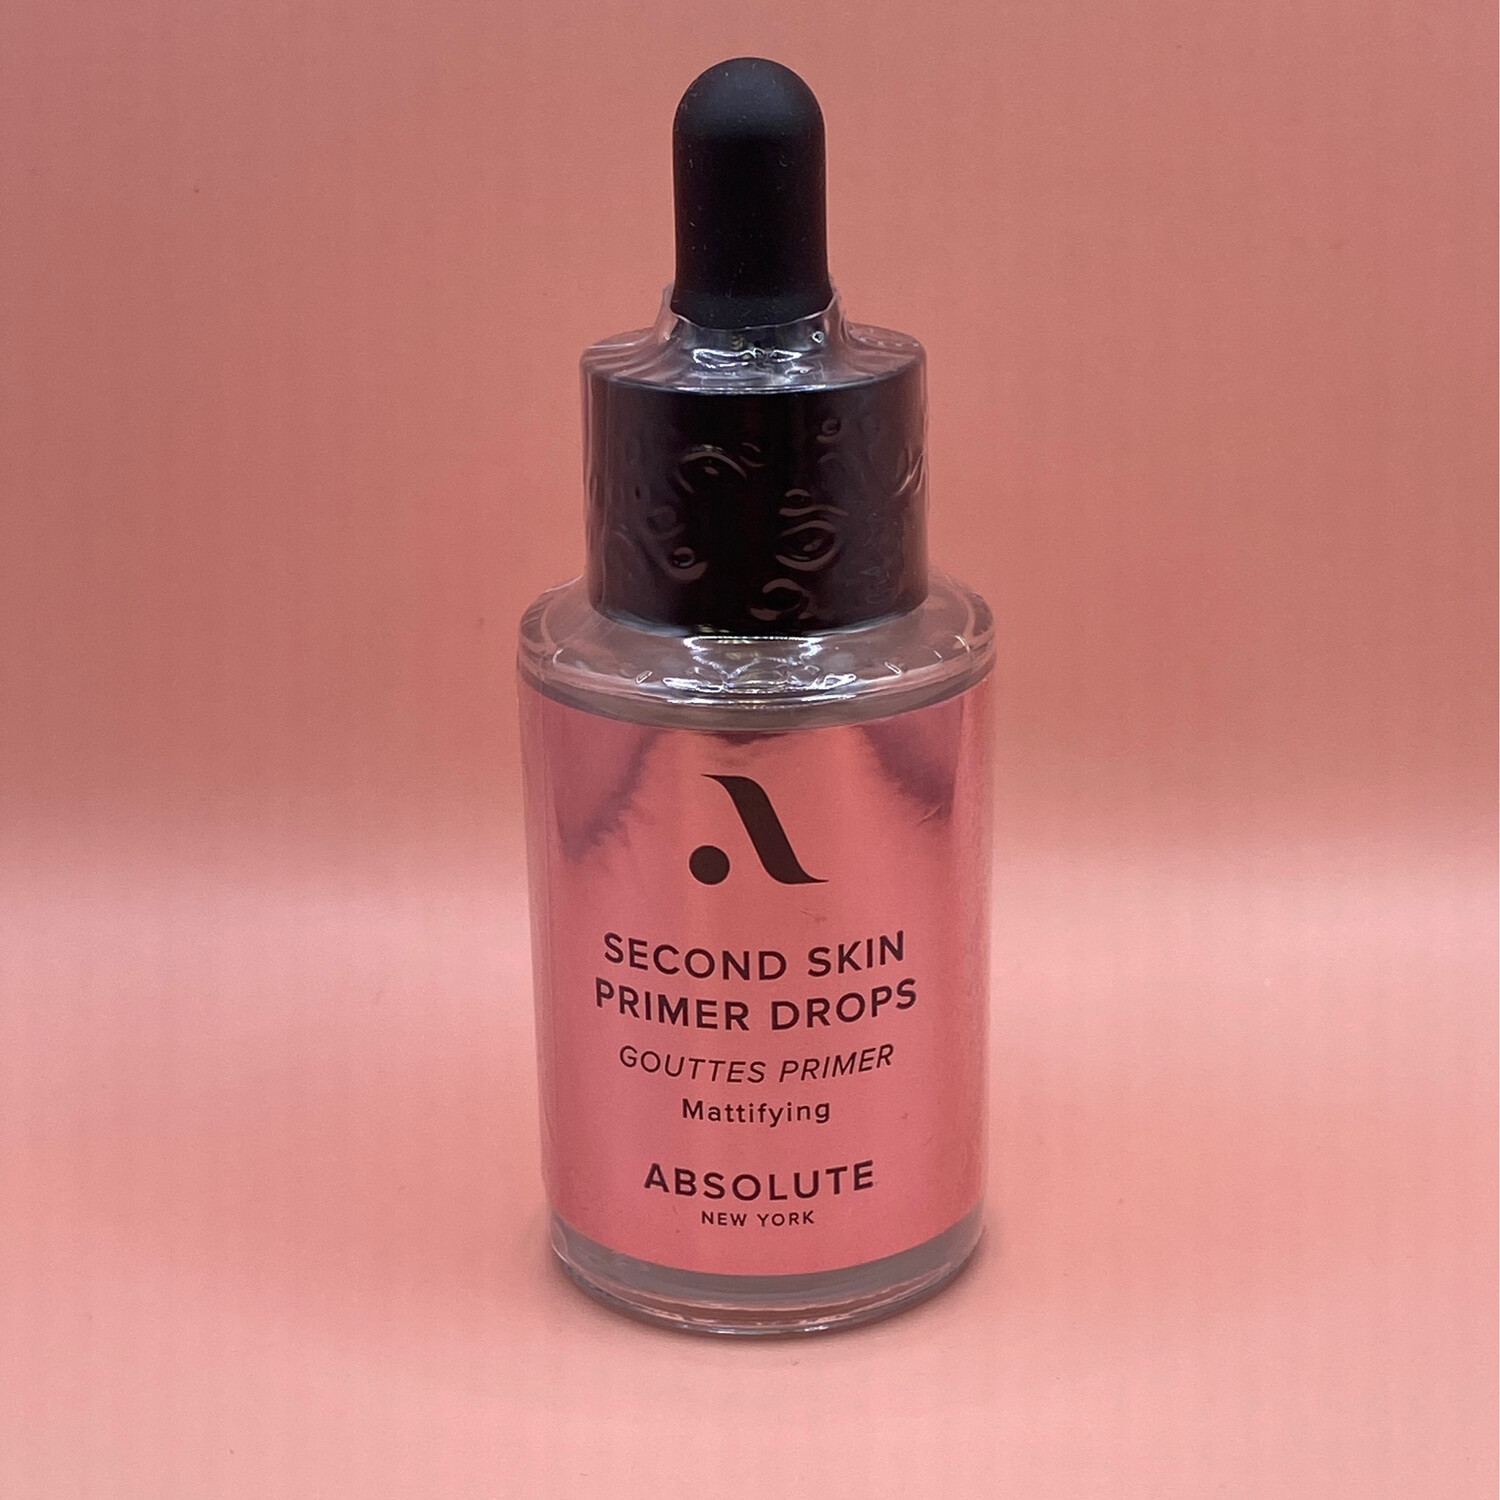 ABSOLUTE MFPD01 SECOND SKIN PRIMER DROPS MATTIFYING